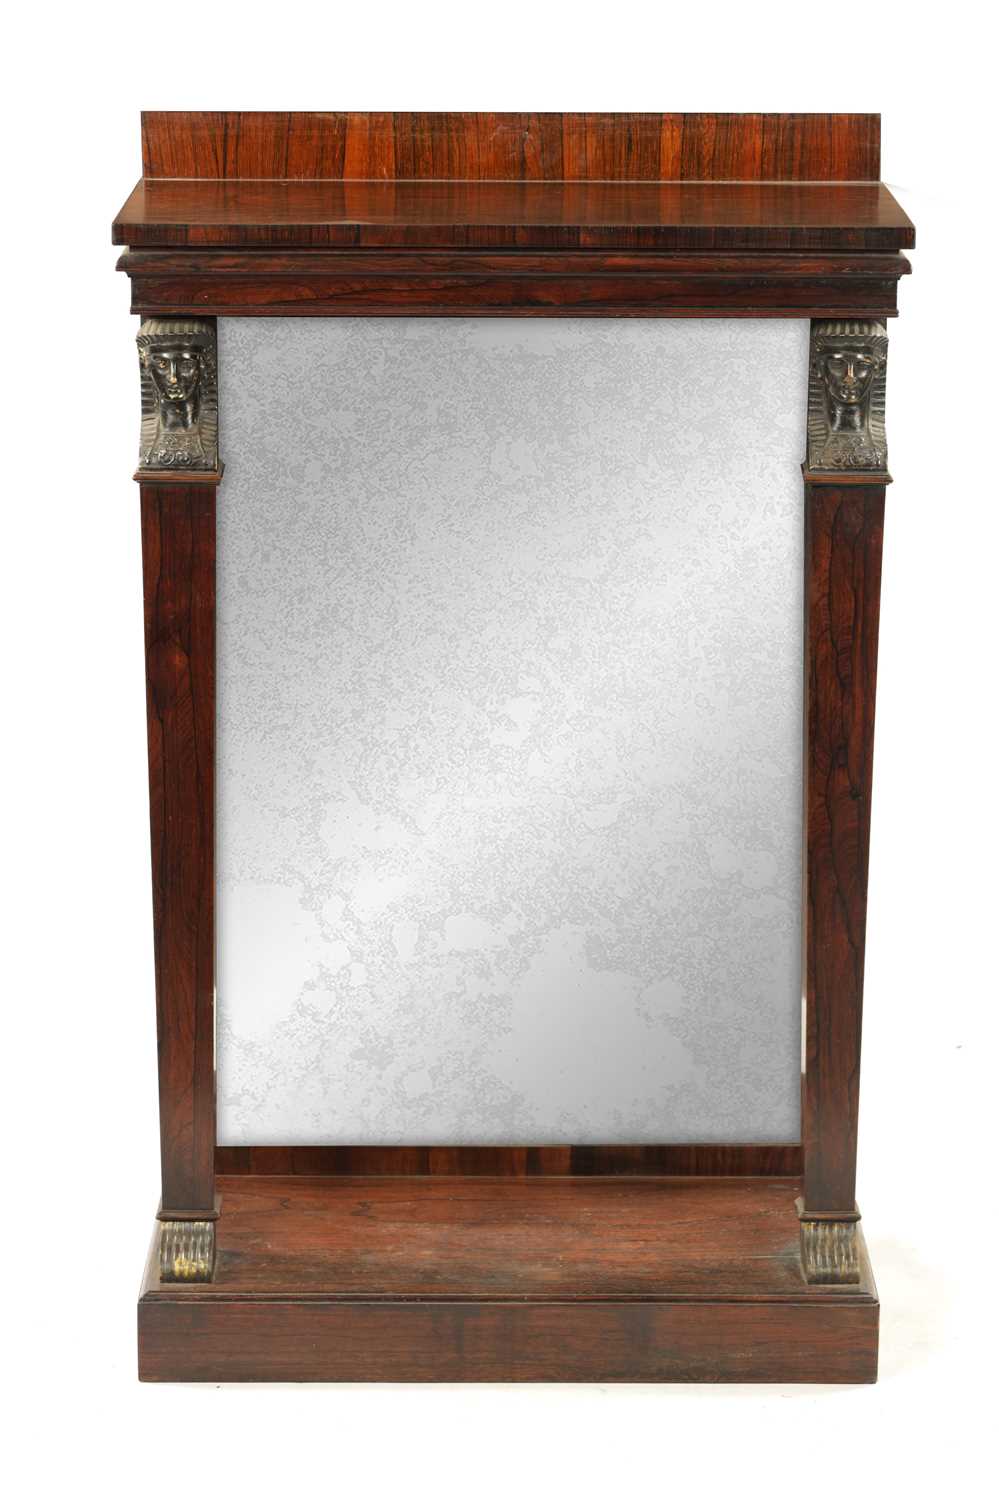 A REGENCY EYPTIAN REVIVAL ROSEWOOD MIRRORED BACK CONSOLE TABLE